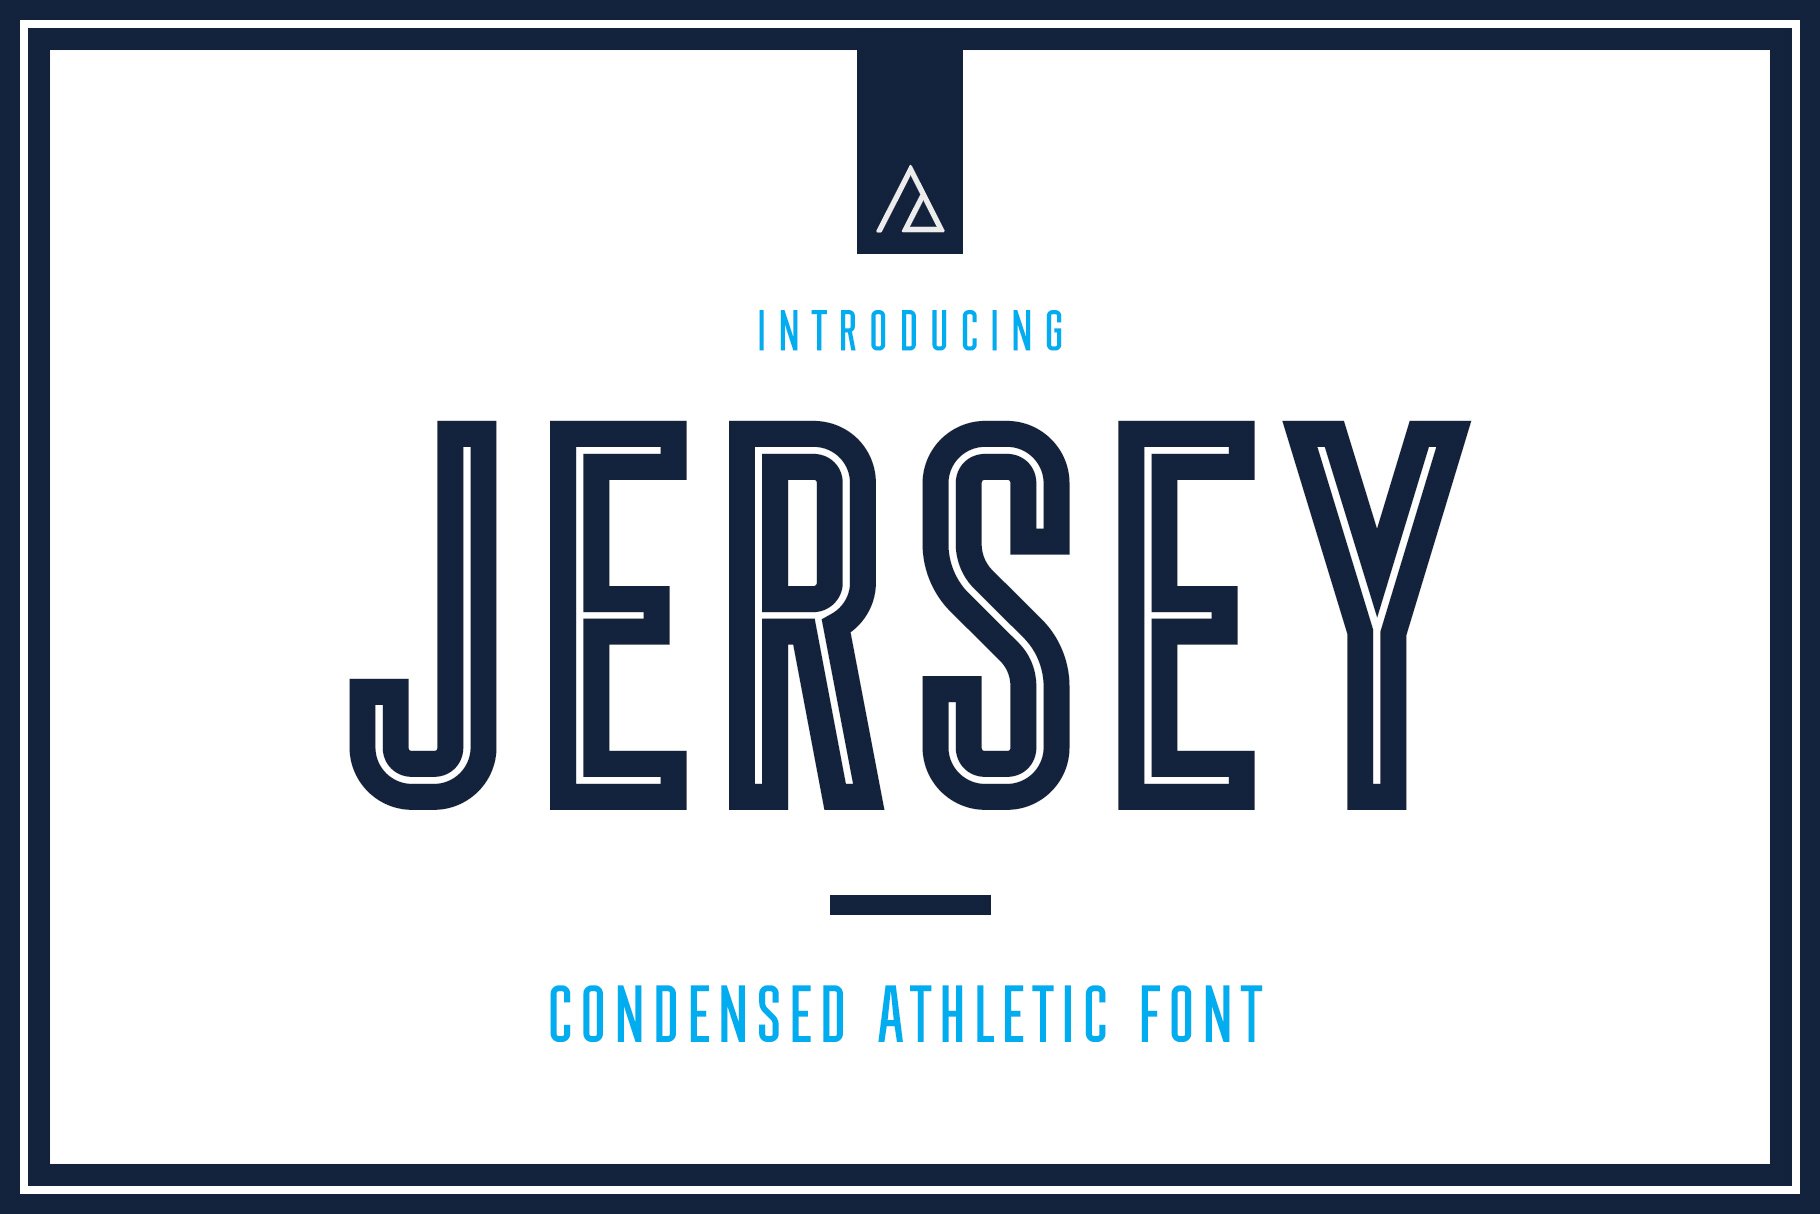 Jersey - Condensed Athletic Font cover image.